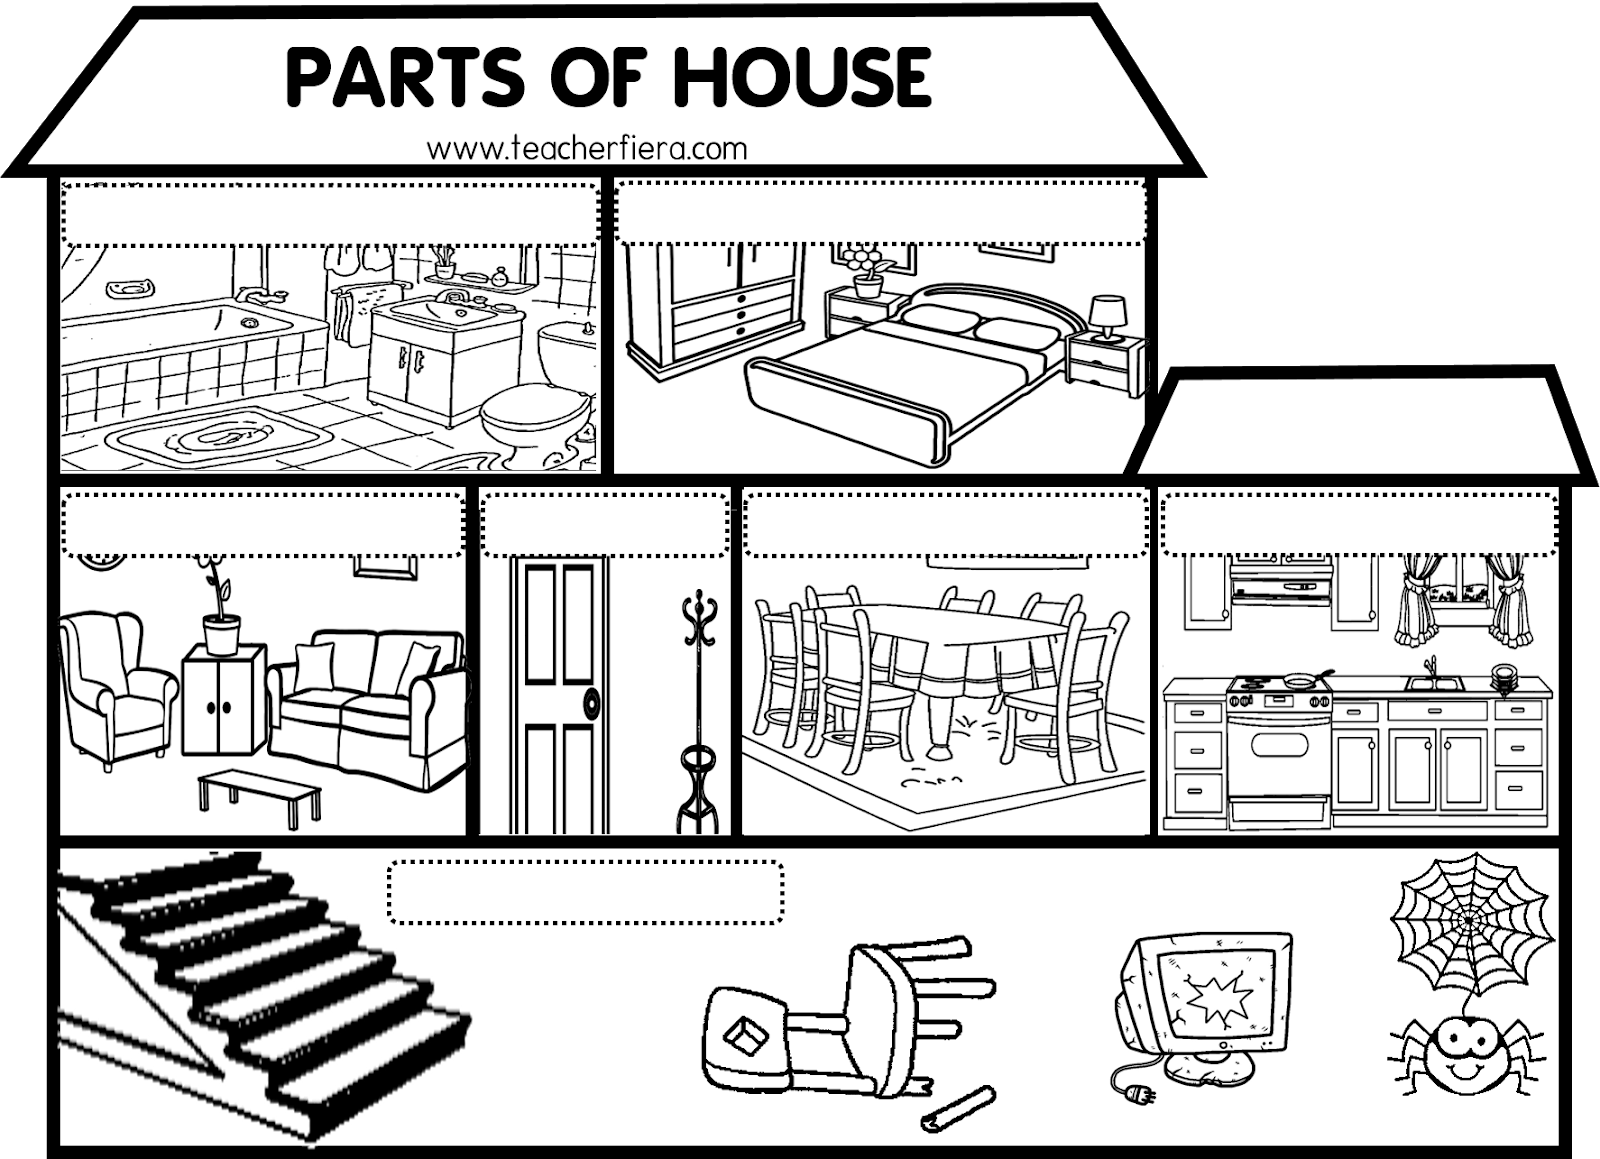 Rooms in the House раскраска. Дом Worksheets. Parts of the House. The Rooms of a House задание.